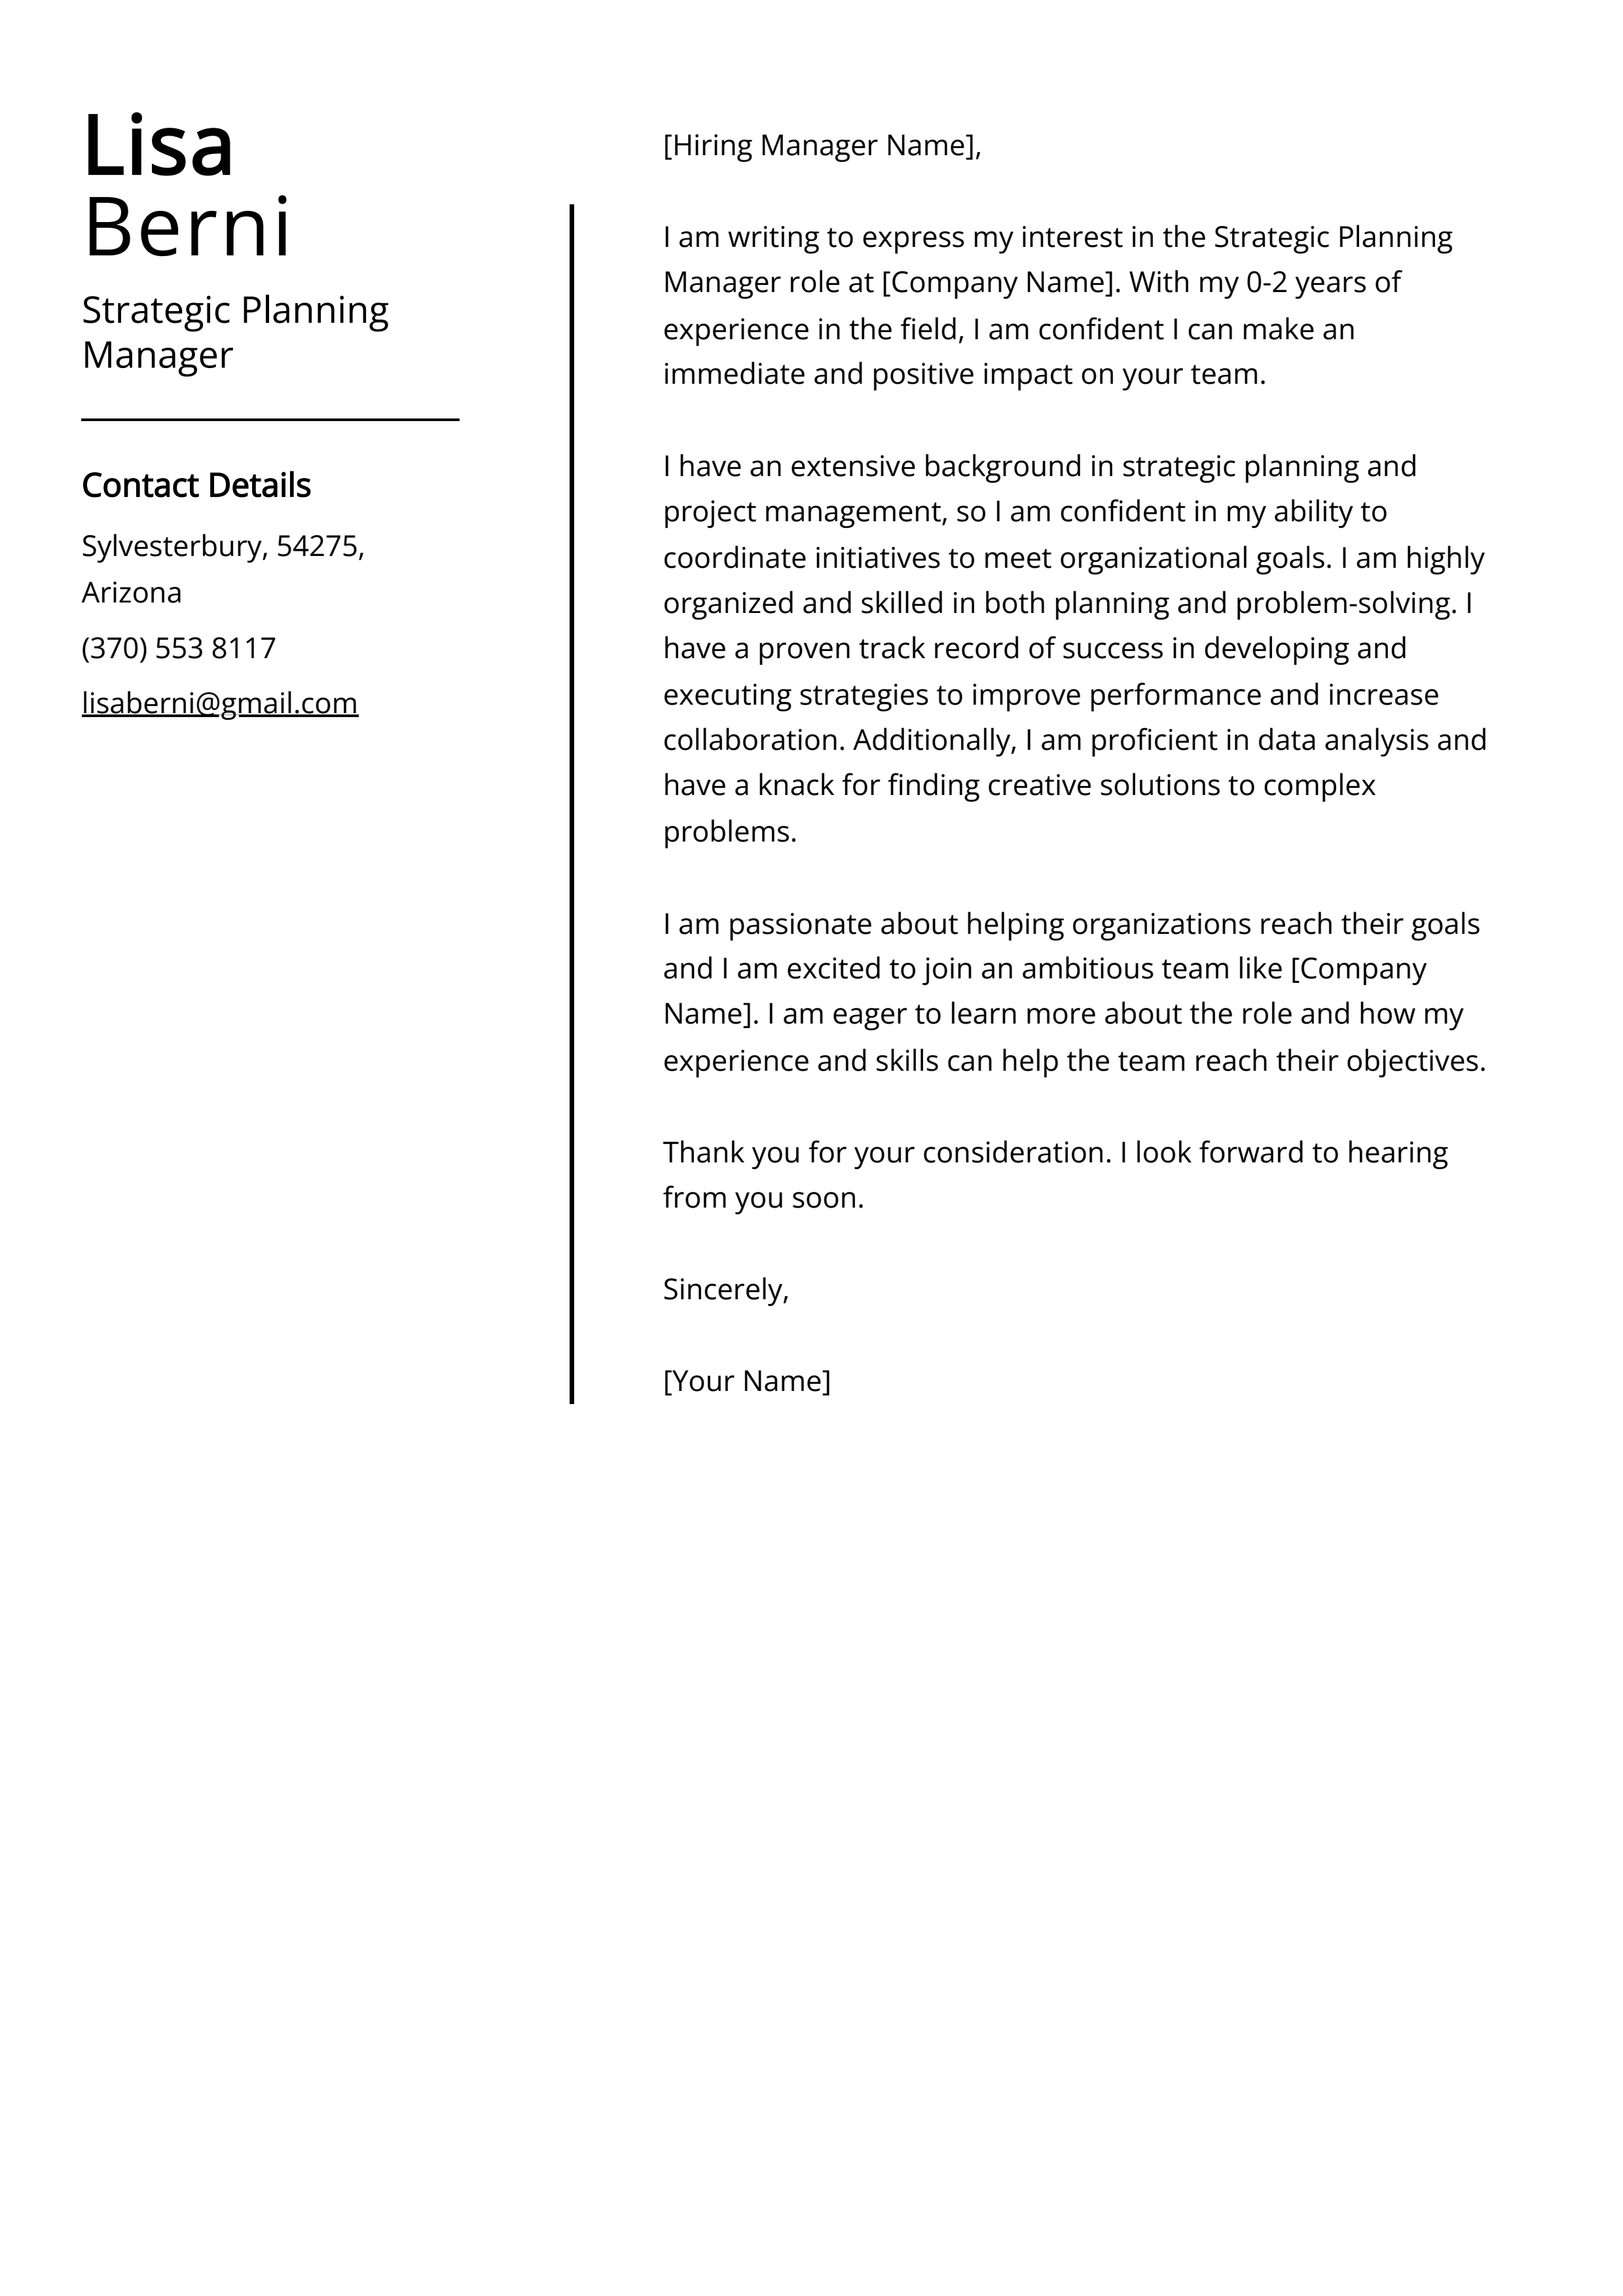 Strategic Planning Manager Cover Letter Example